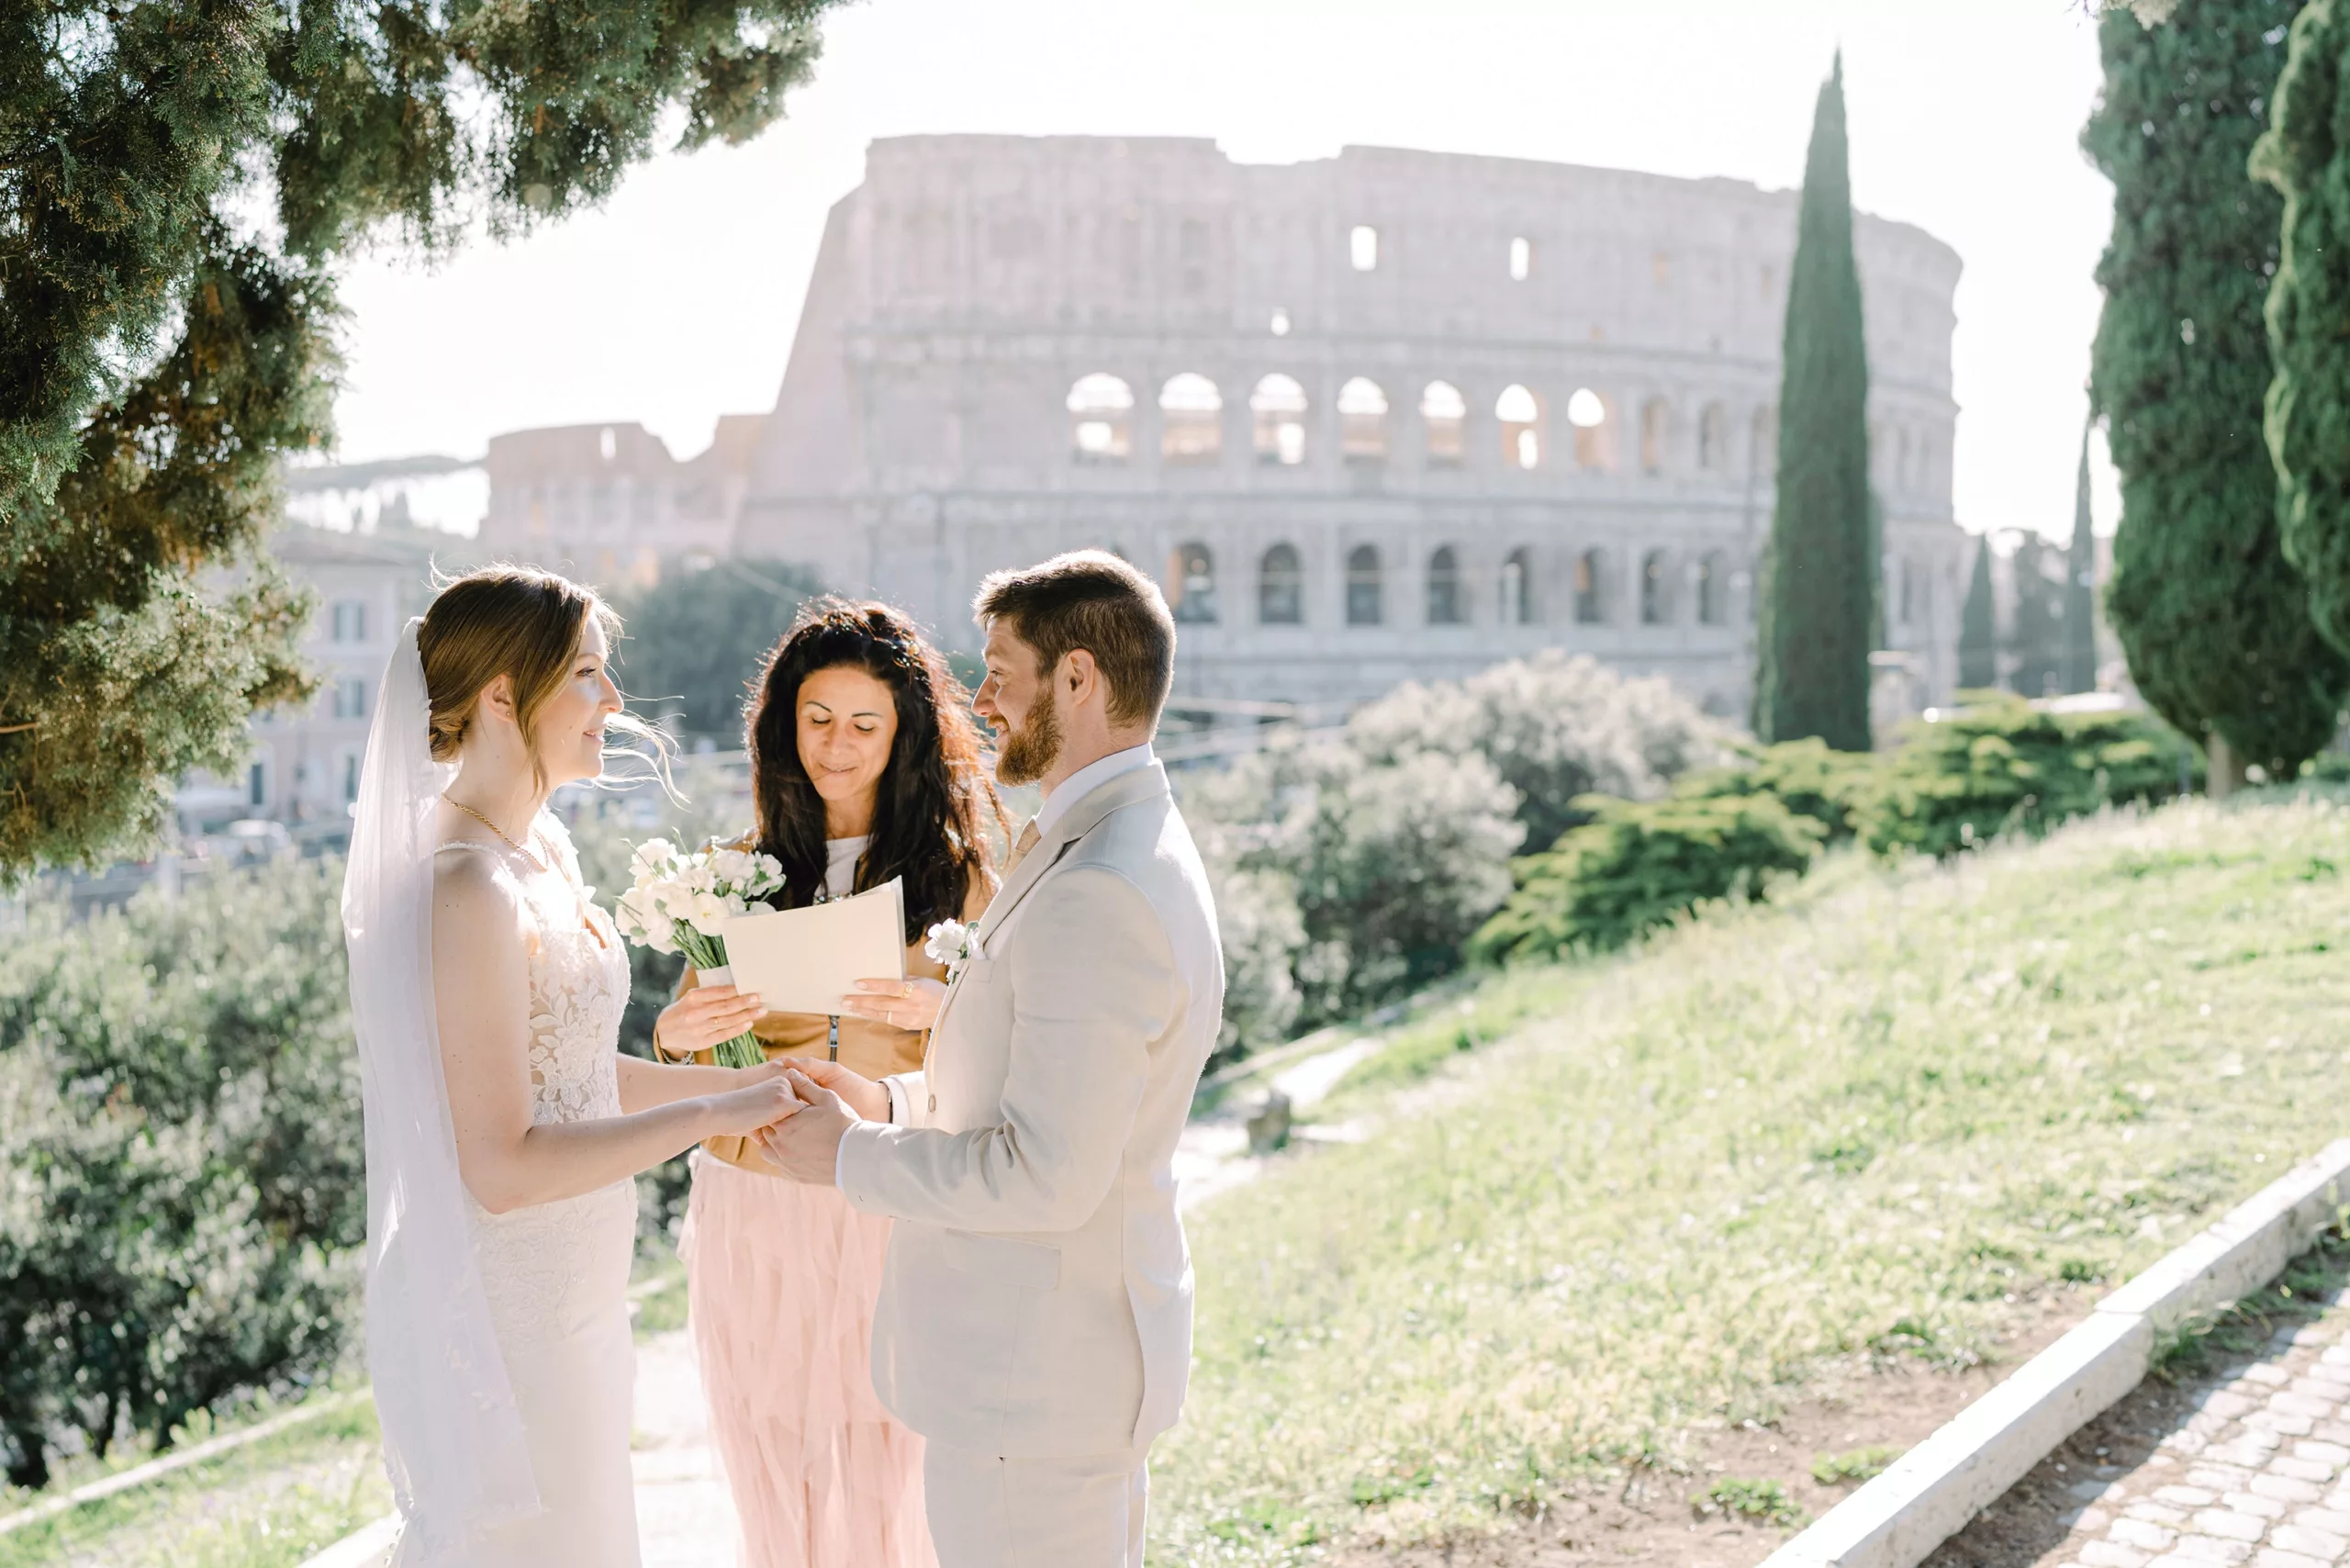 exchanging their vows at colosseum